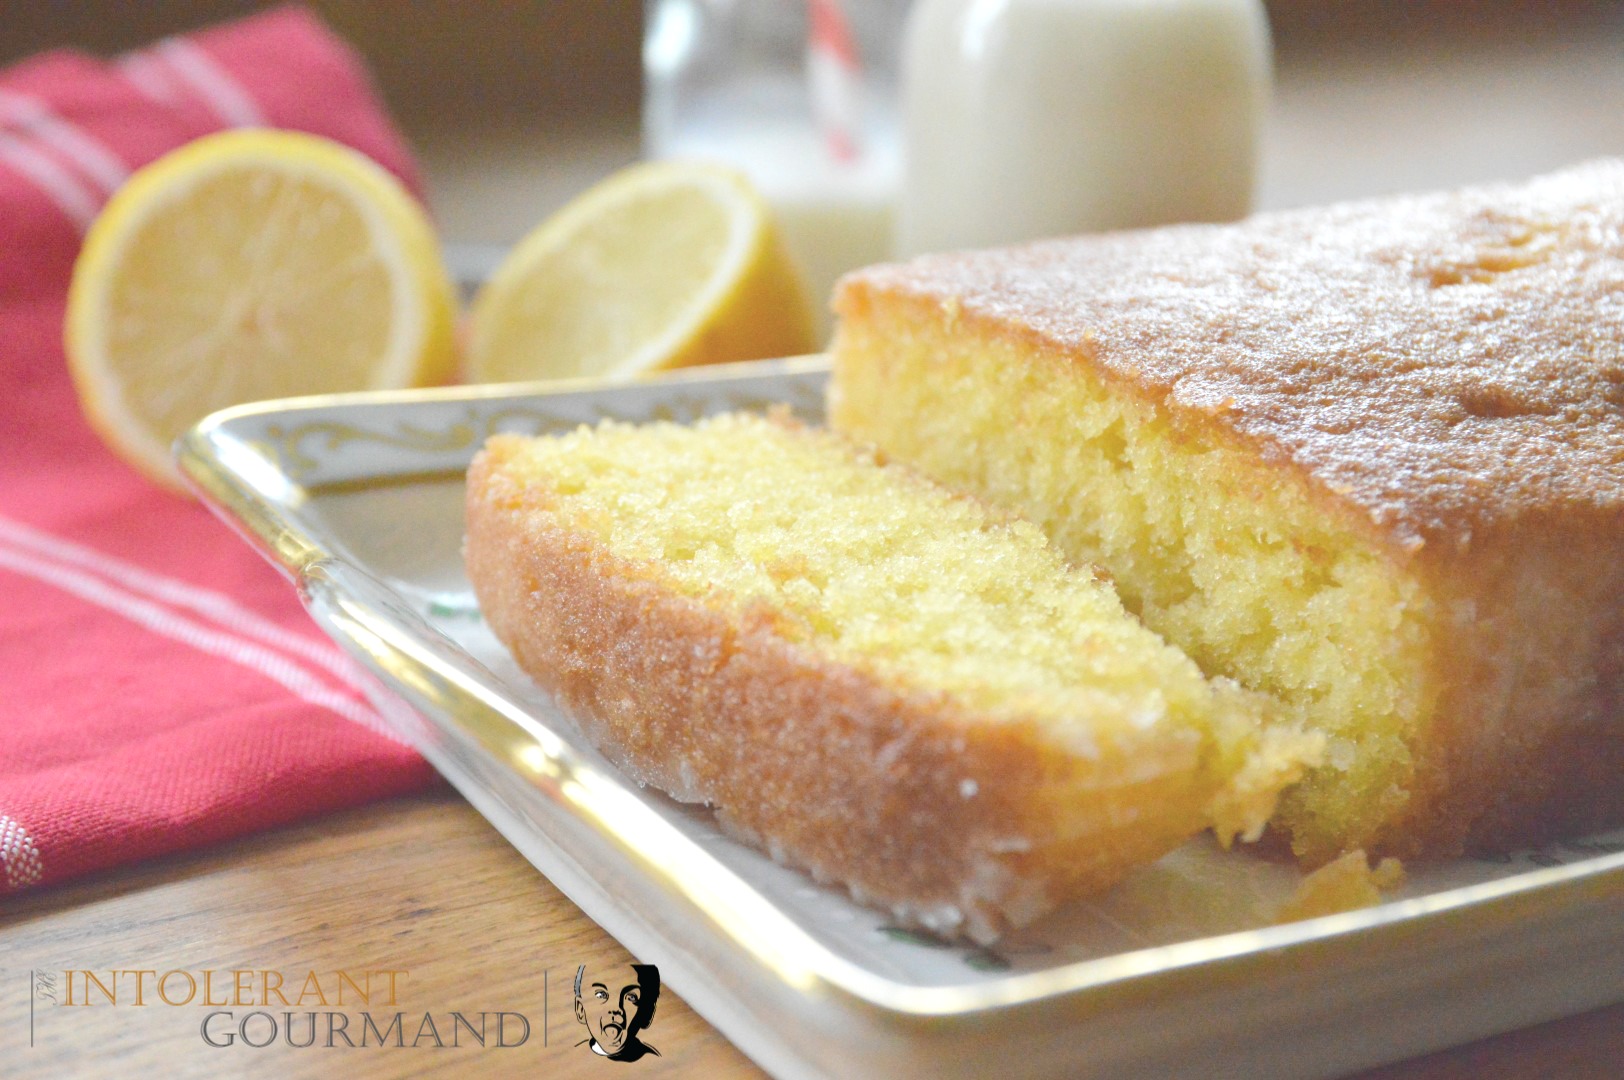 Gluten free dairy free lemon drizzle cake - a deliciously light and fluffy sponge made with Free From Fairy flour www.intolerantgourmand.com